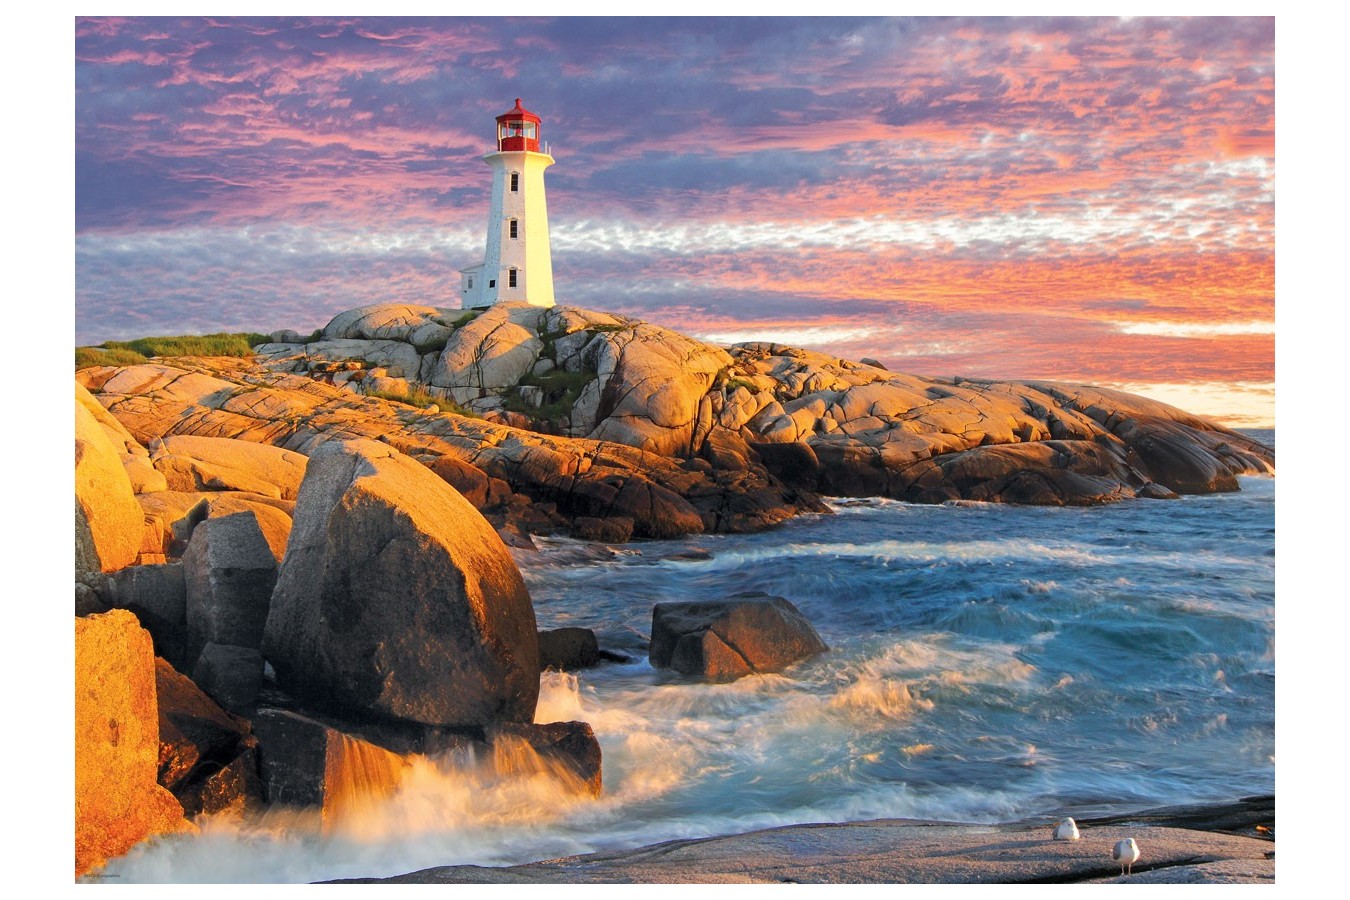 Puzzle Eurographics - Peggy's Cove Lighthouse, 1000 piese (6000-5437)